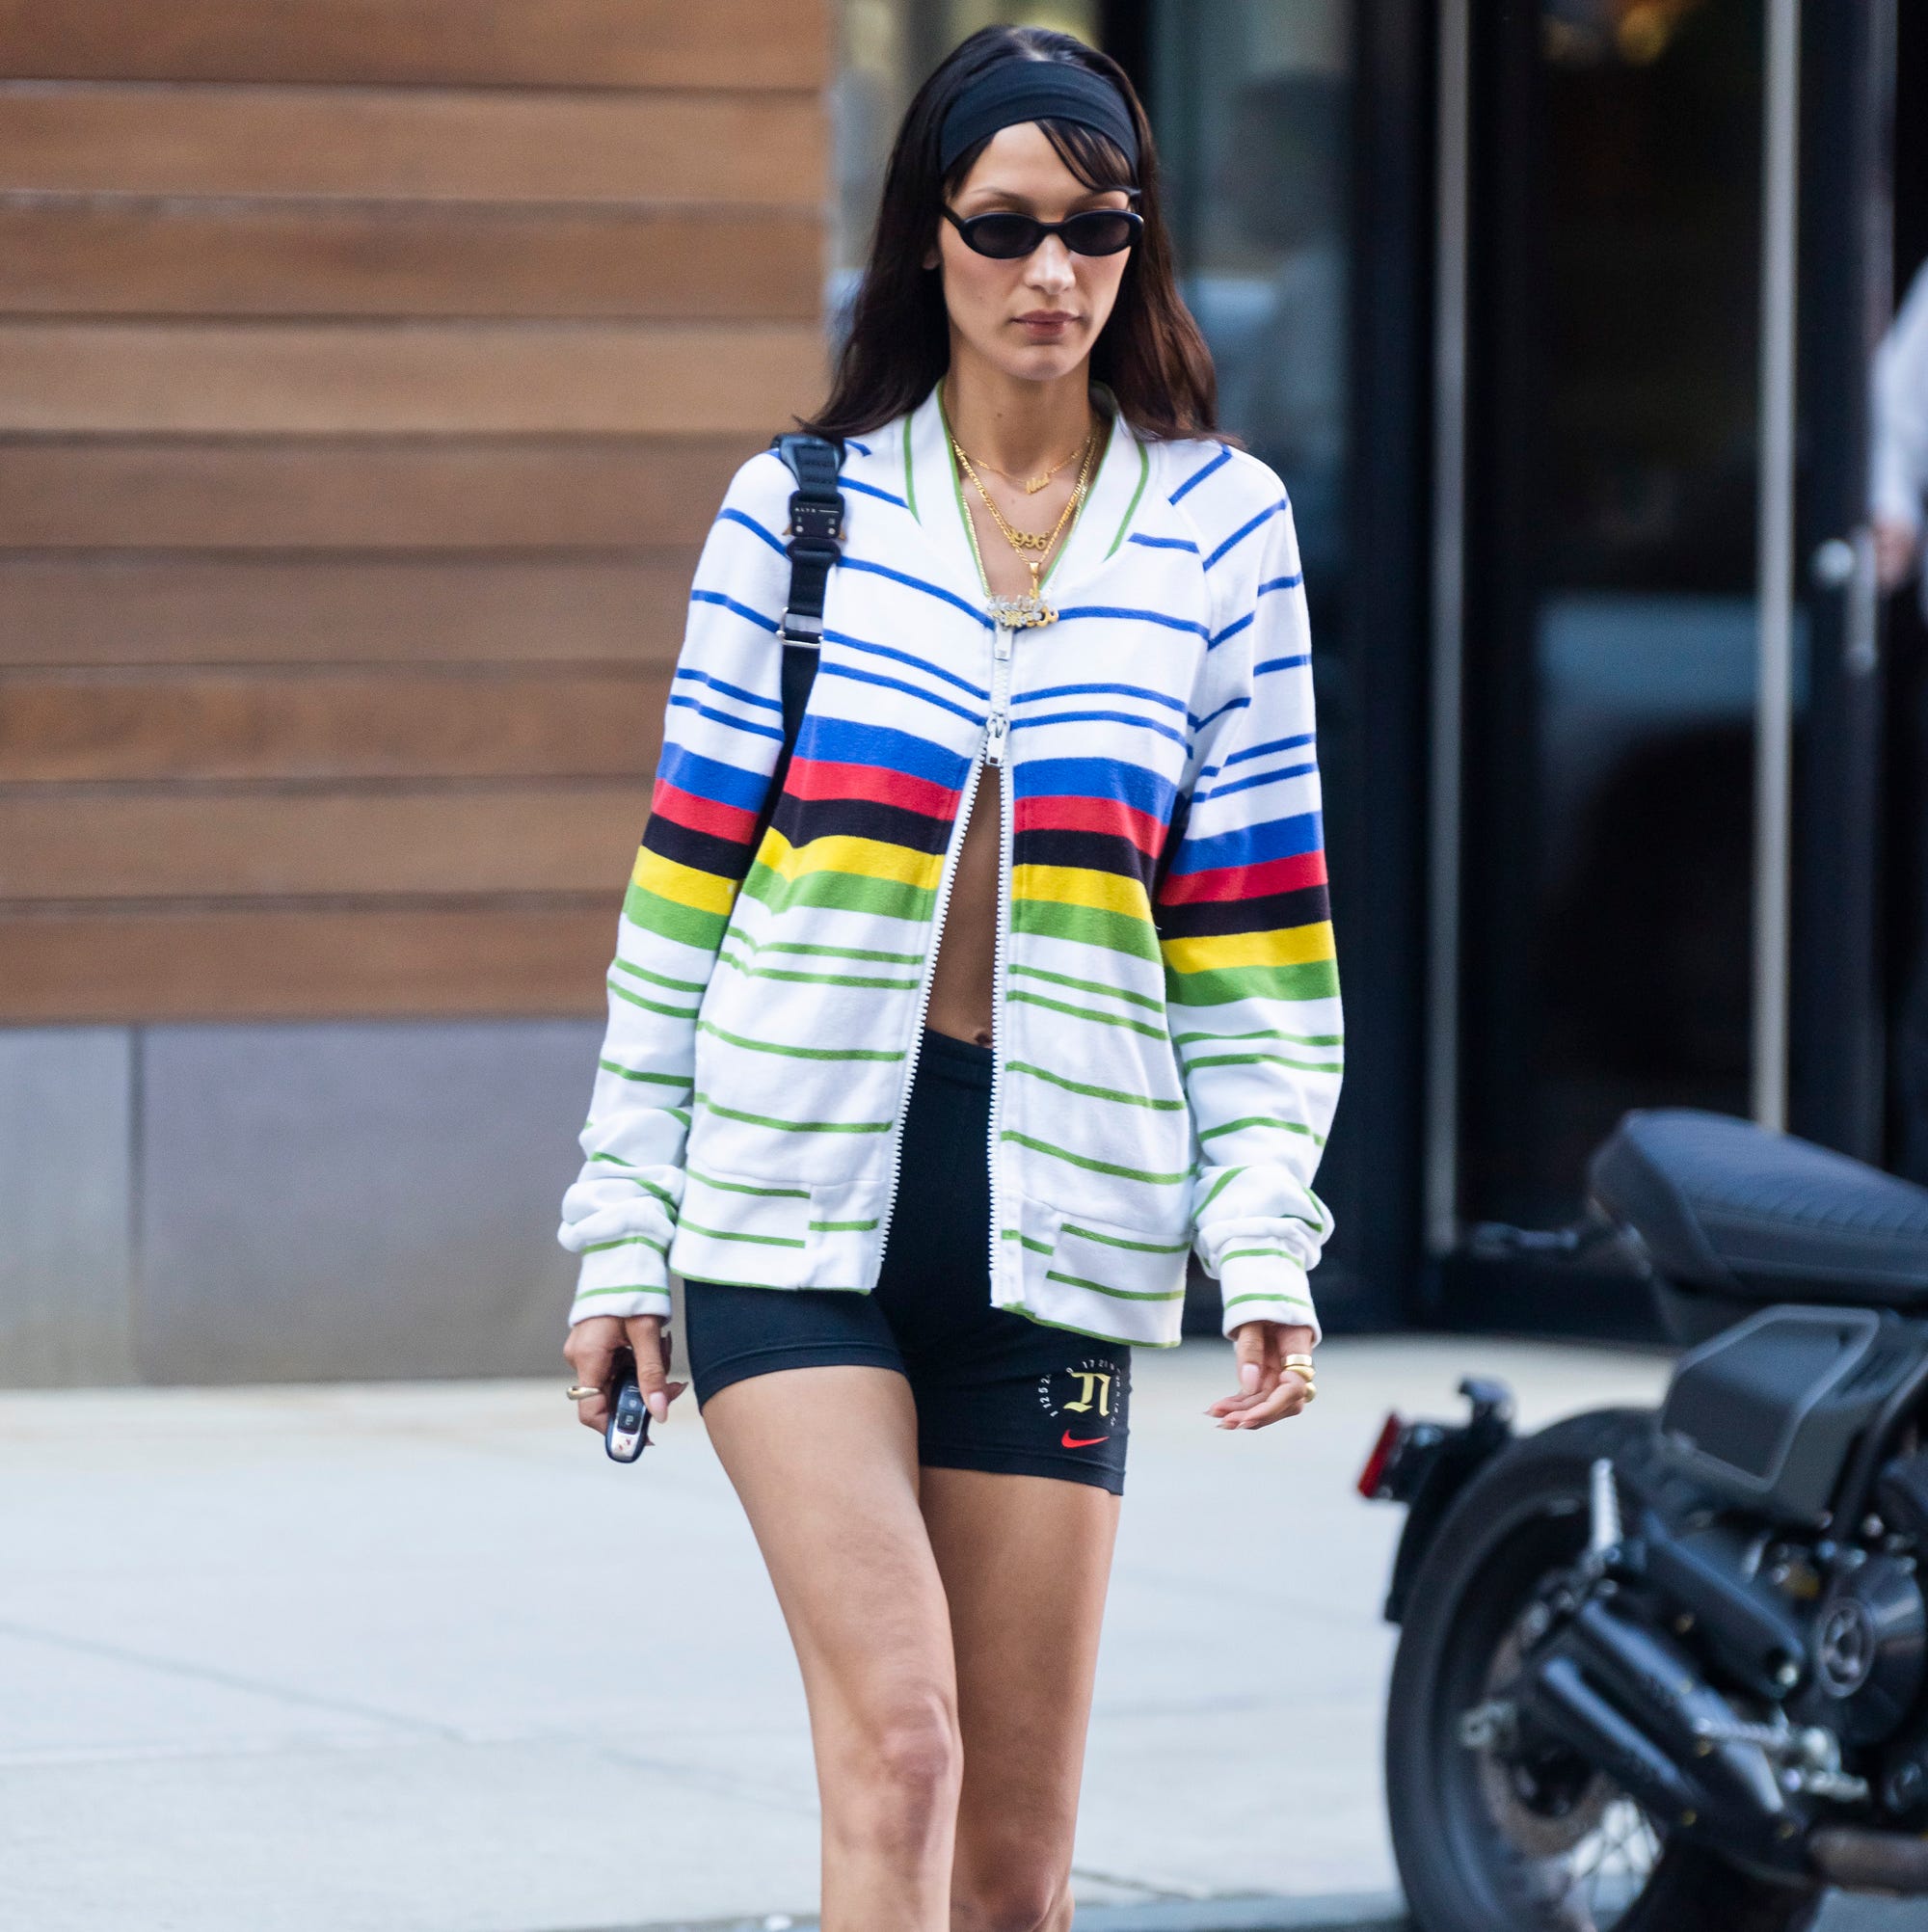 Bella Hadid Pairs Her Biker Shorts With an Unzipped Top